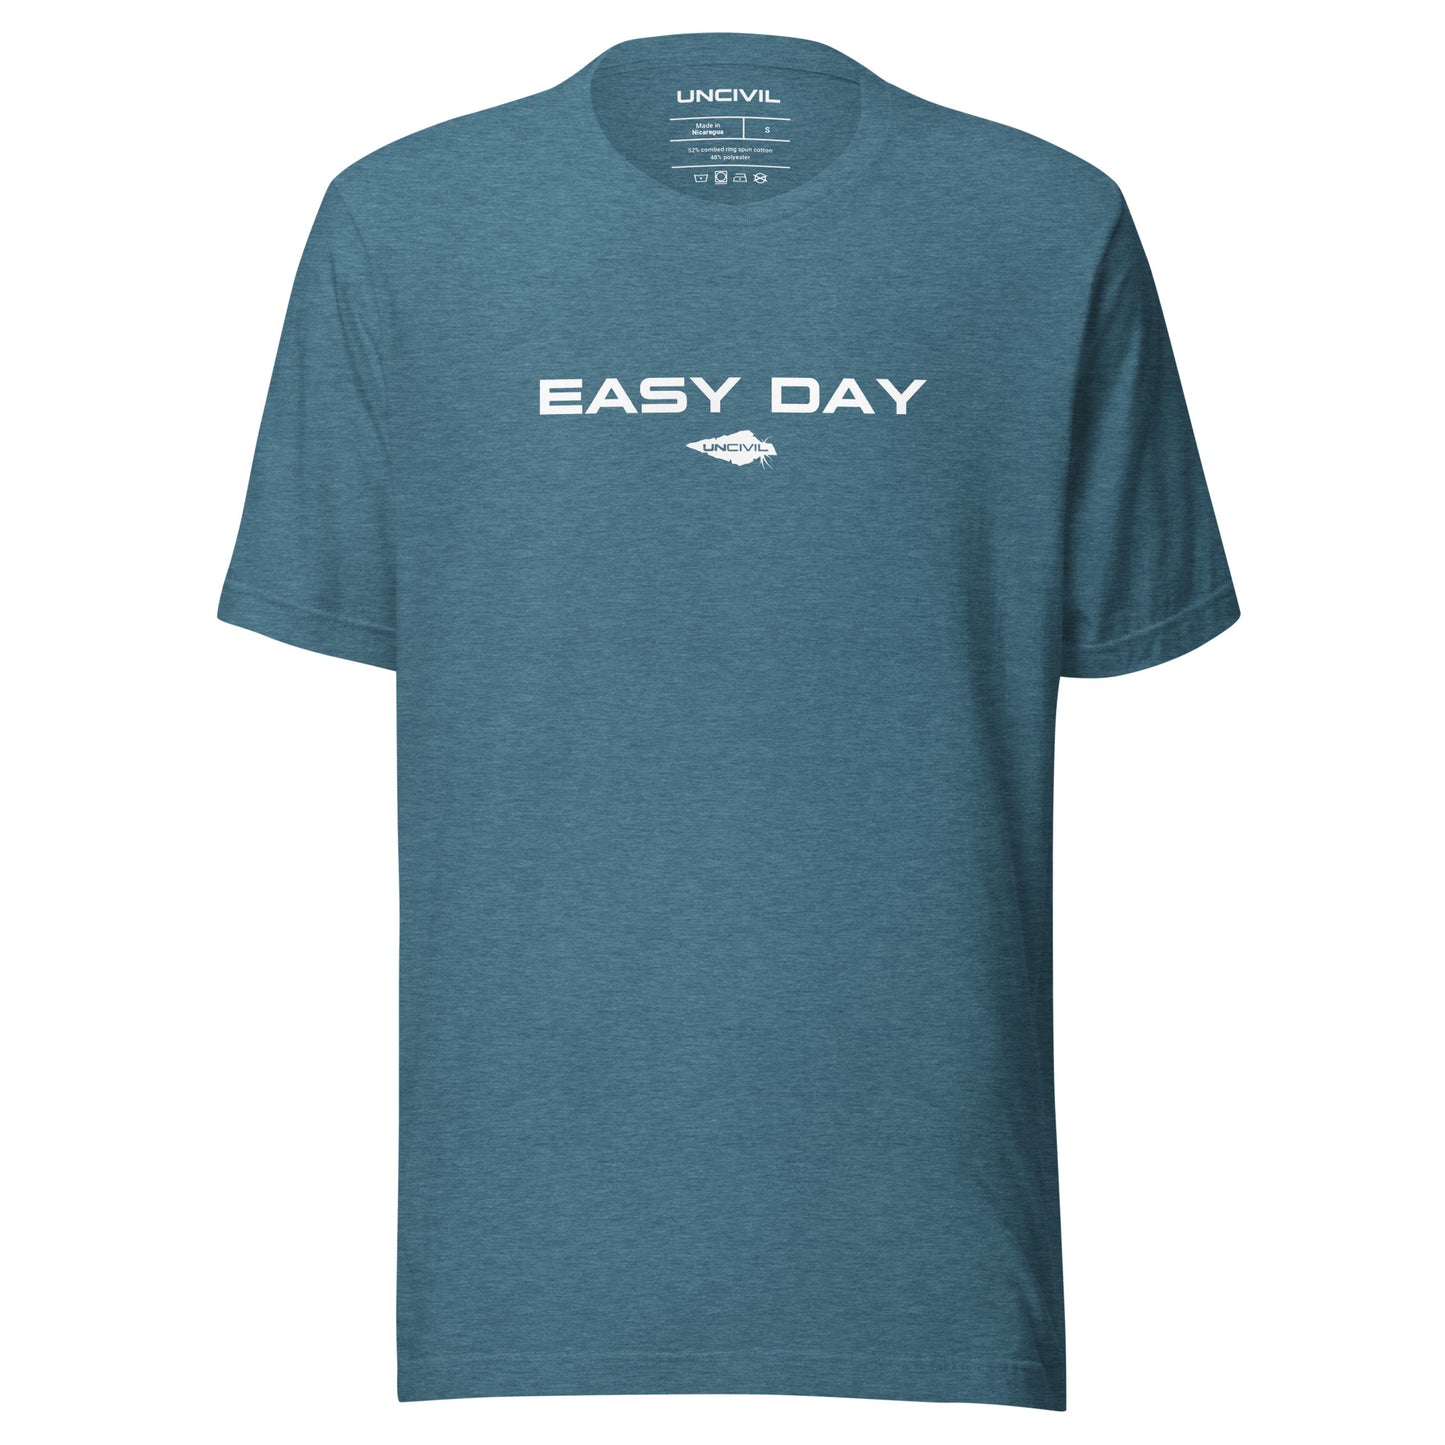 Easy Day UNCIVIL Tee, inspired by the Navy Seals phrase "Easy Day". Heather Deep Teal men's shirt.